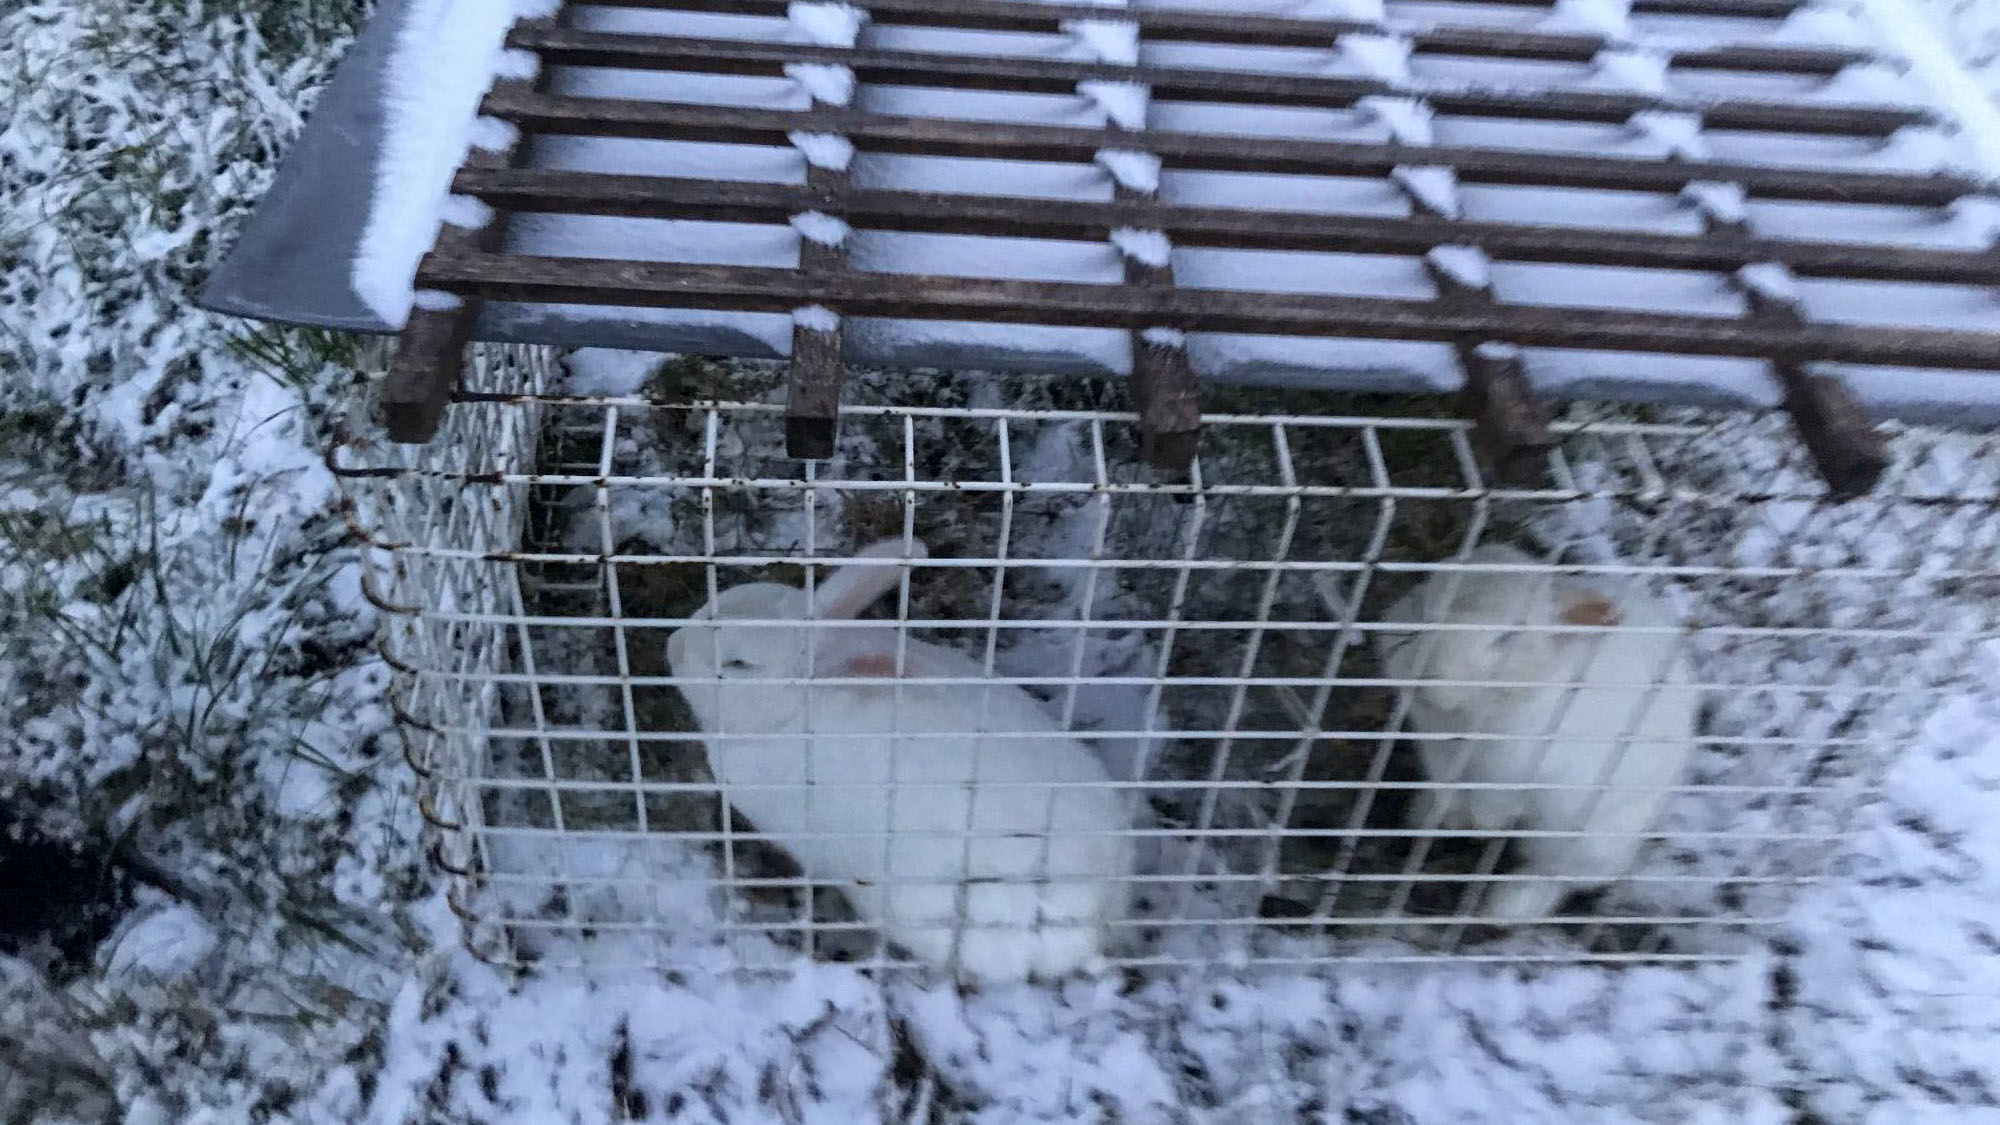 Read more about the article Outrage As Farm Rabbits Kept In Cramped Cage On Icy Ground In Freezing Austrian Winter